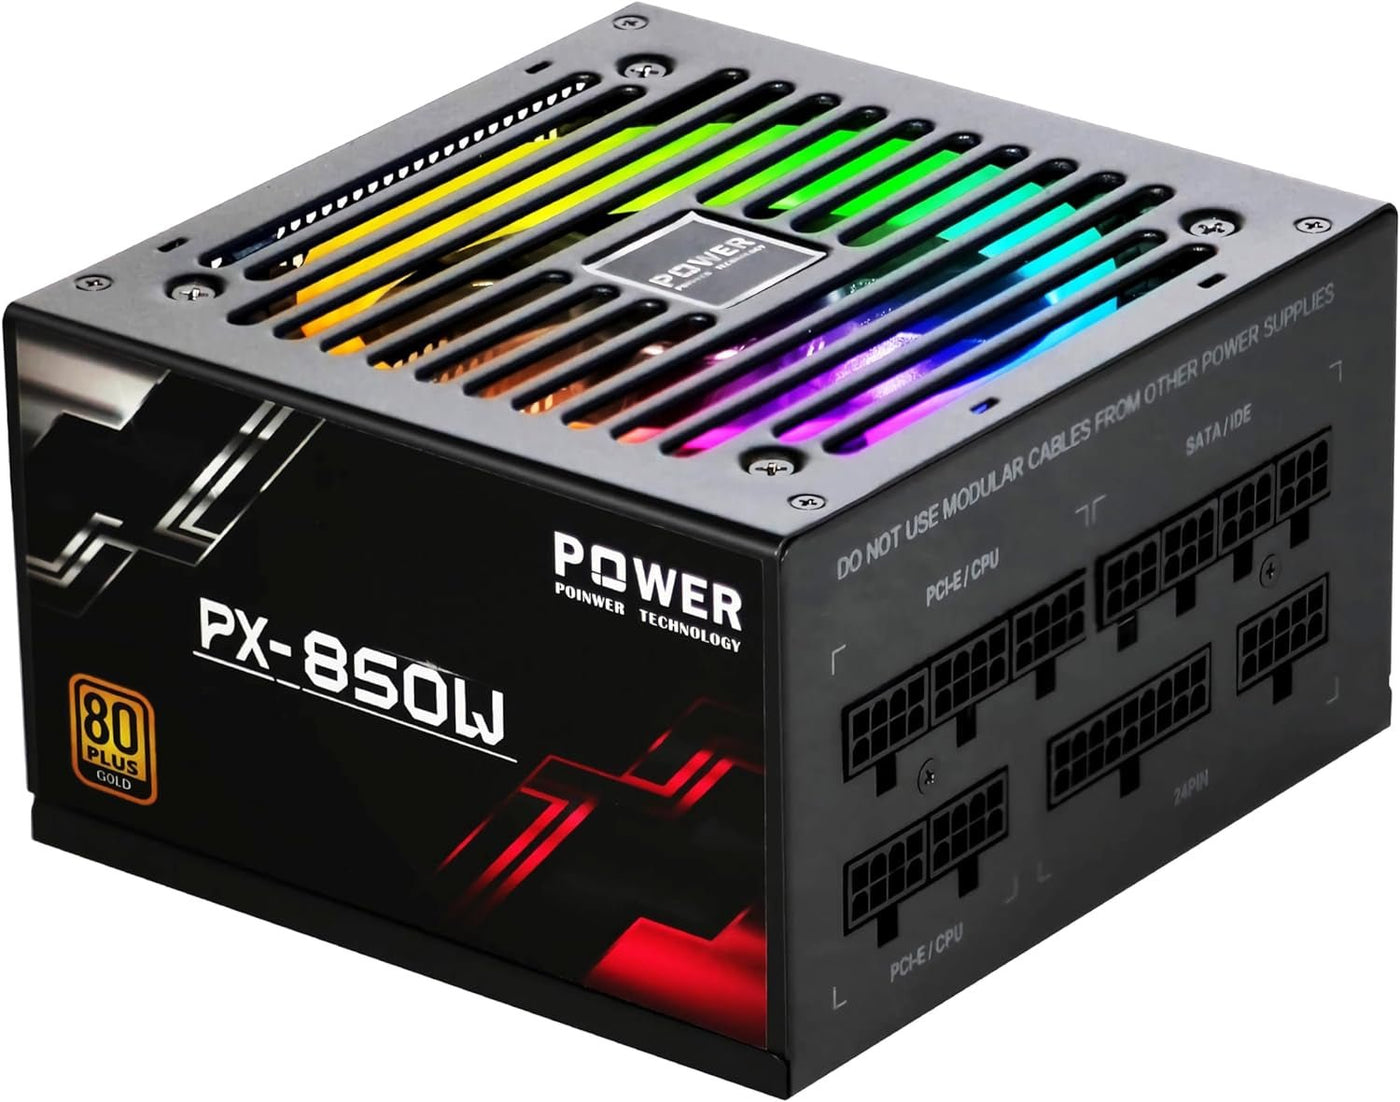 850 Watt Power Supply 80 plus Gold - Silent 12Cm RGB Fan, Full Modular, Active PFC, 105°C Capacitor - High-Performance 850W PSU for Gaming & ATX Case Computers, 5 Year Warranty